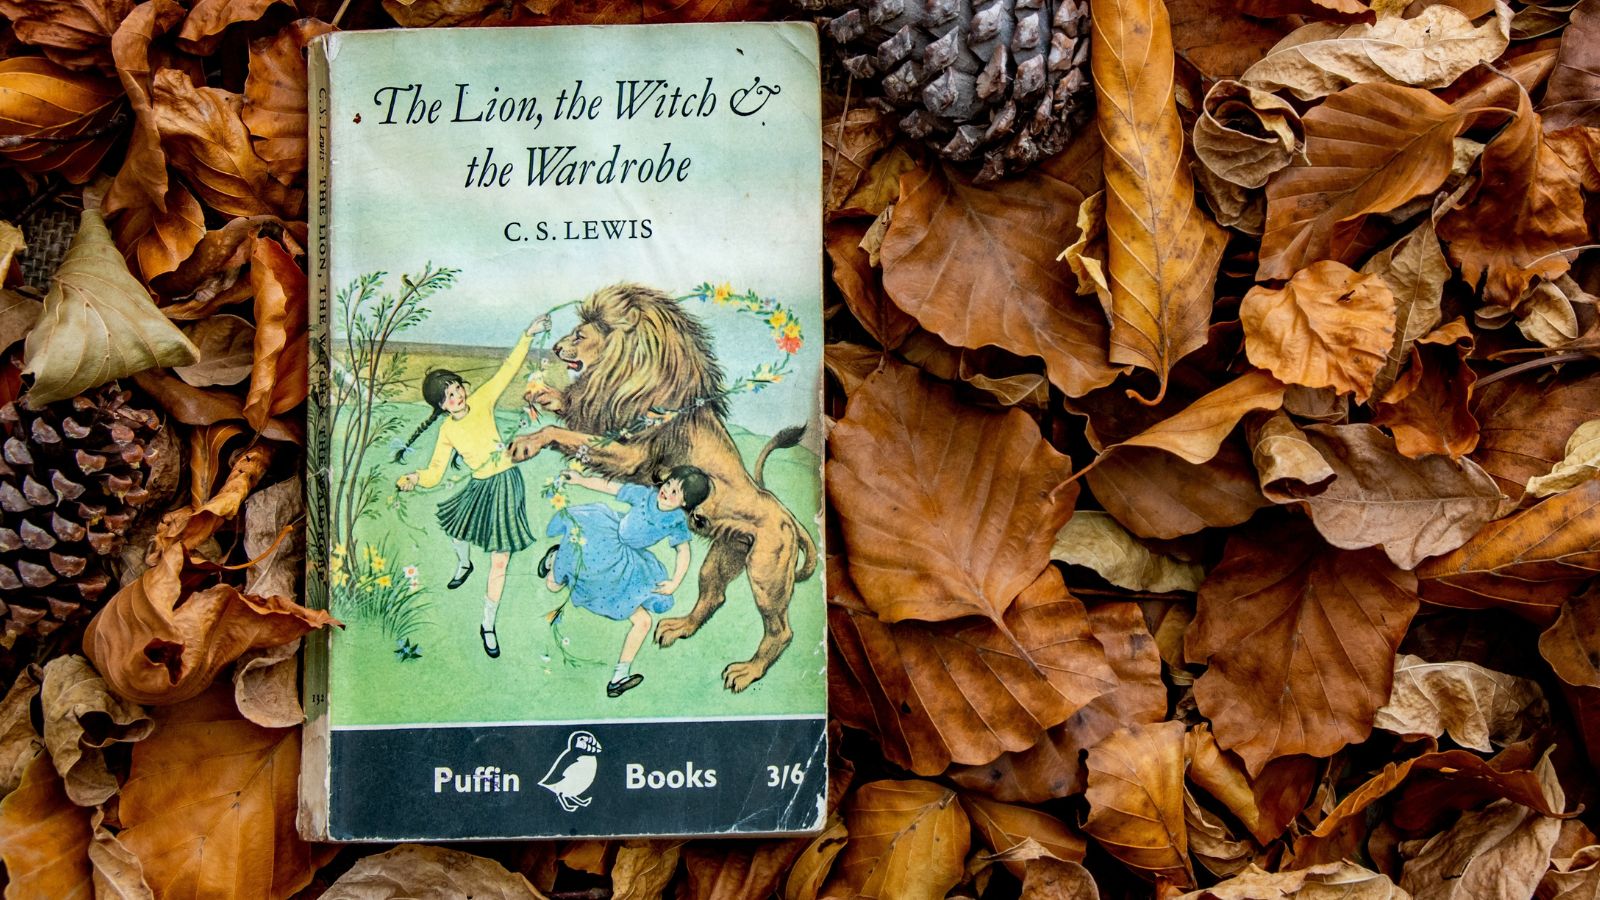 <p>The first published book in the Chronicles of Narnia series, this is a children's fantasy novel that can and should be read by all ages. Many people name this as the book which inspired their love for reading. It stimulates the imagination, telling the story of four siblings who discover a magical world and strive to protect it.</p>